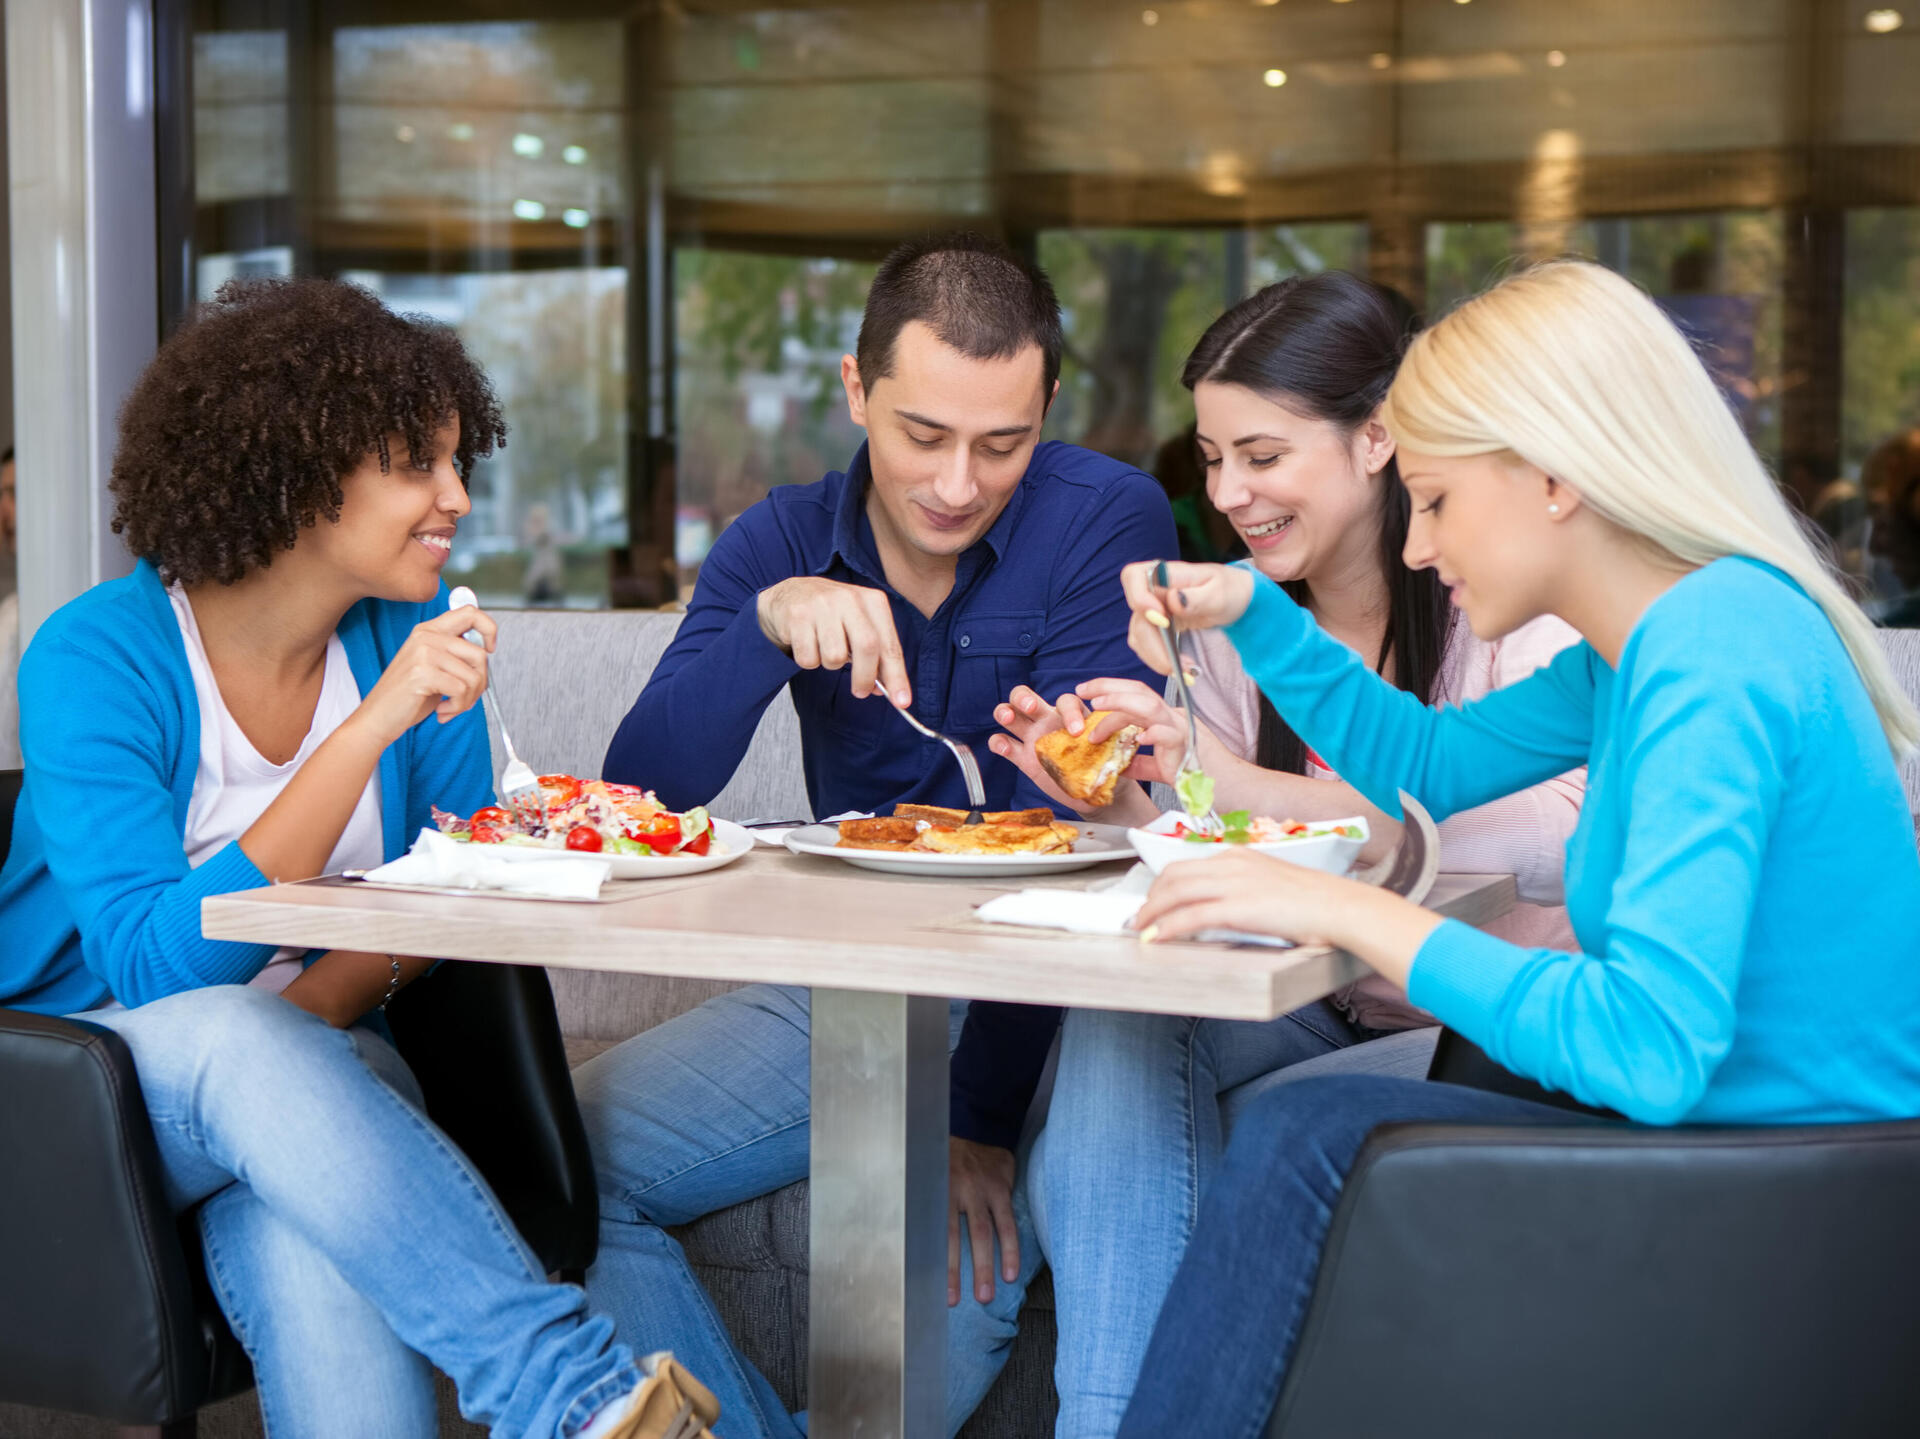 Students eat lunch together at the table